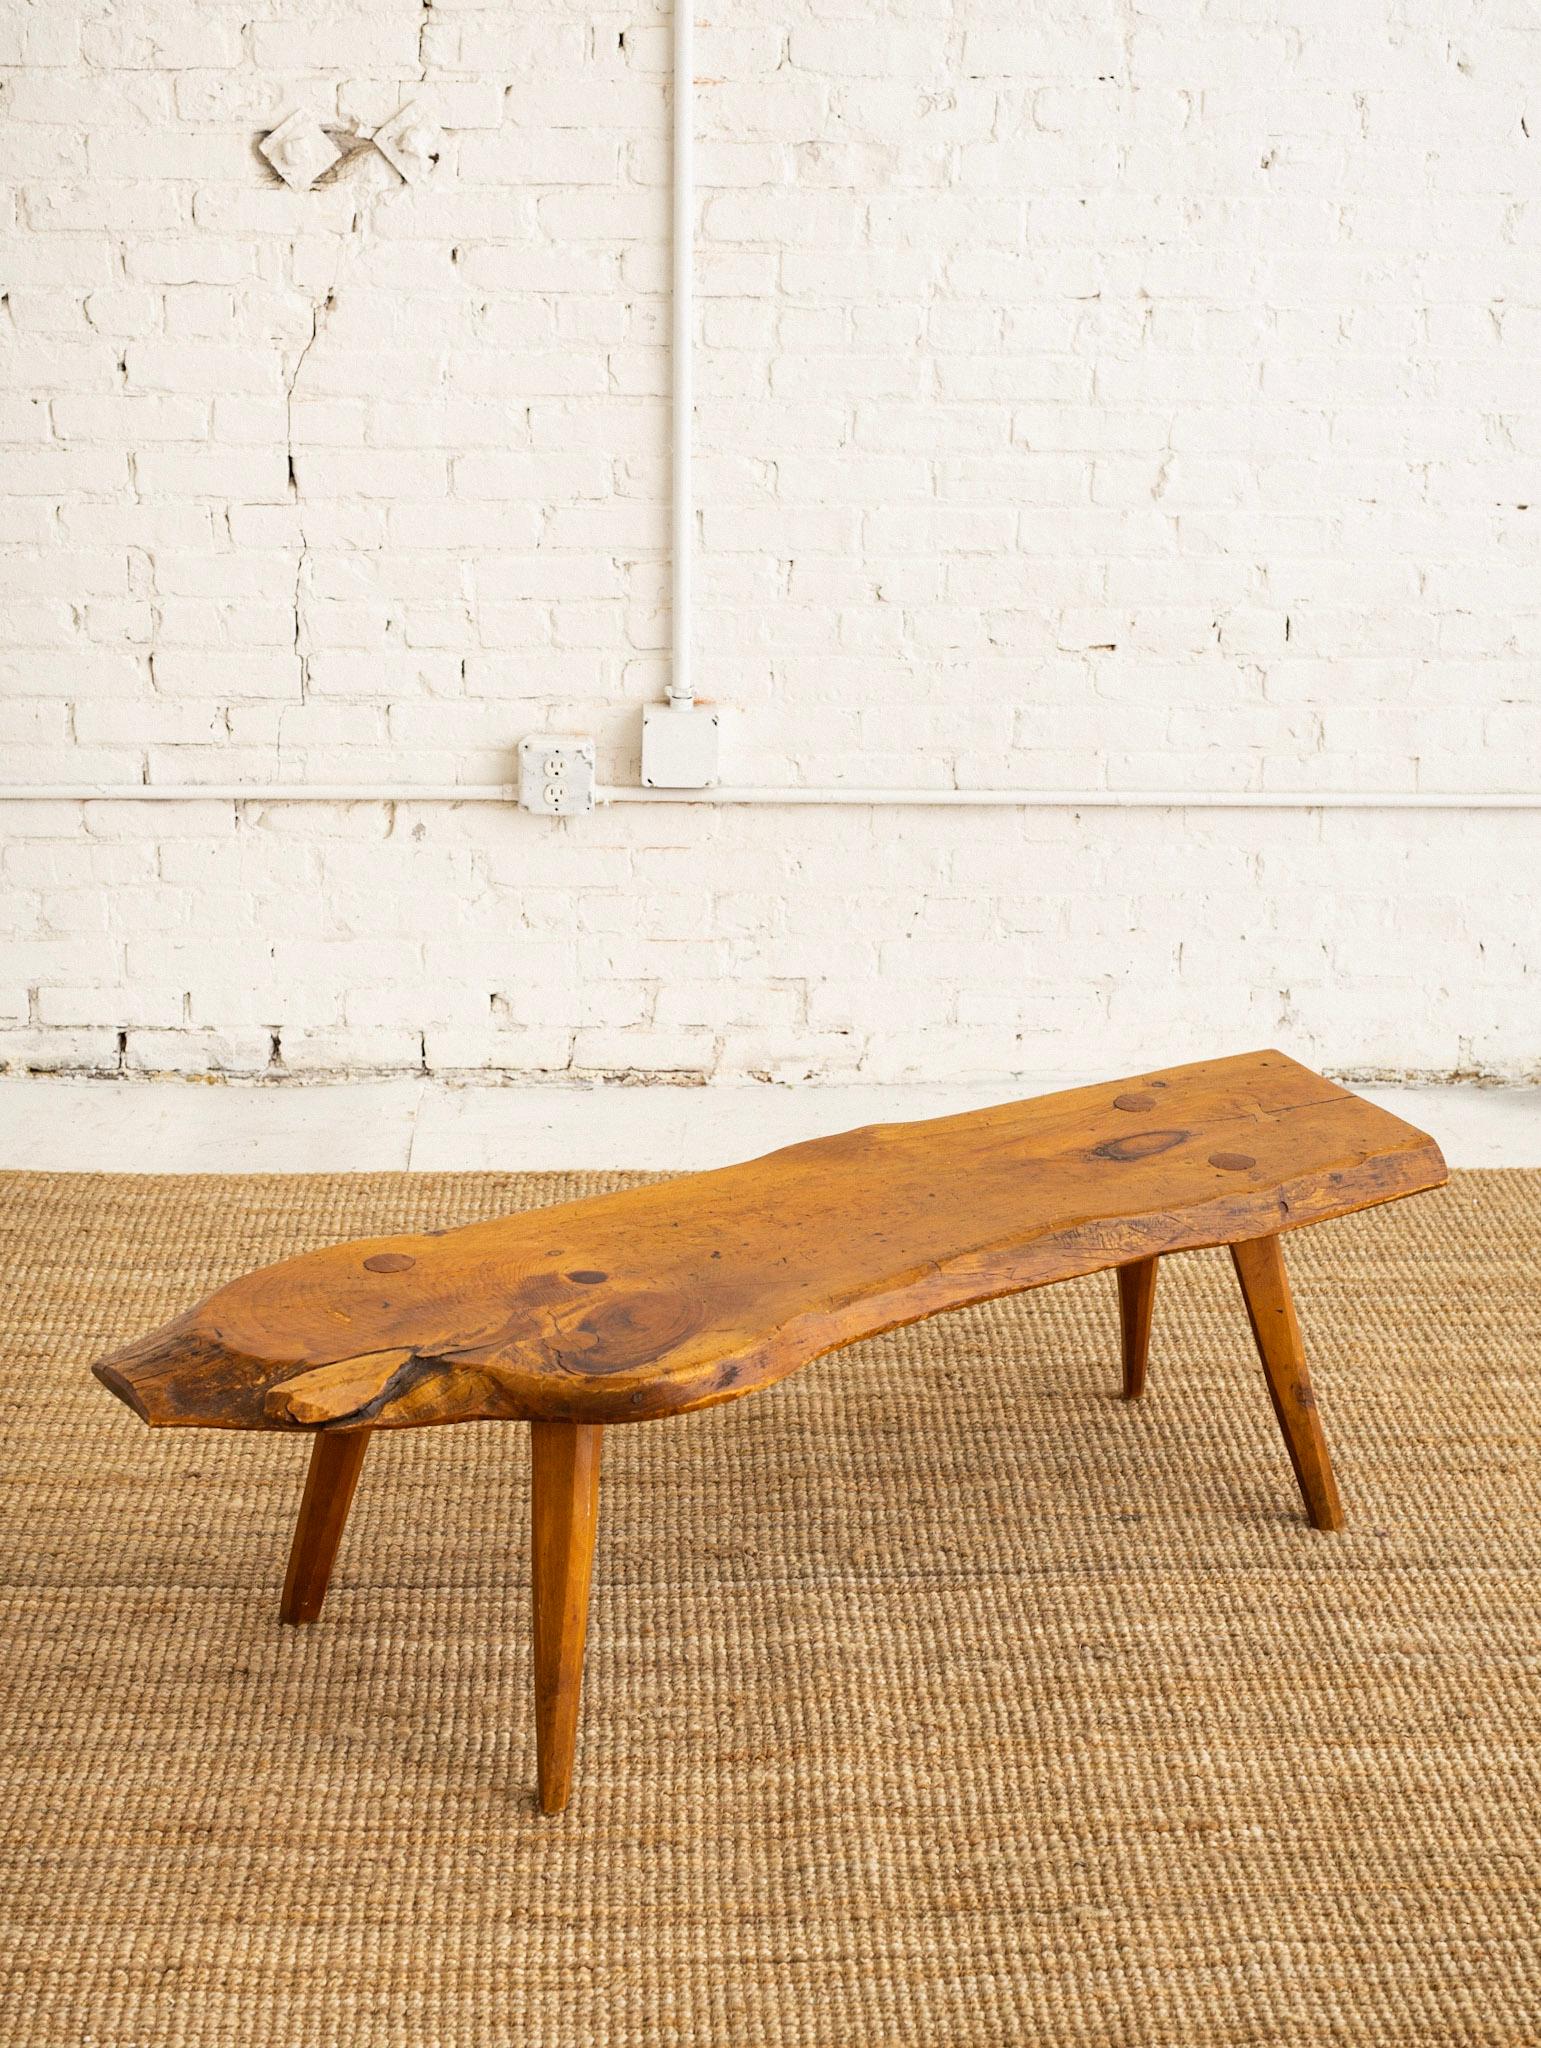 Rustic Live Edge Knotty Pine Coffee Table